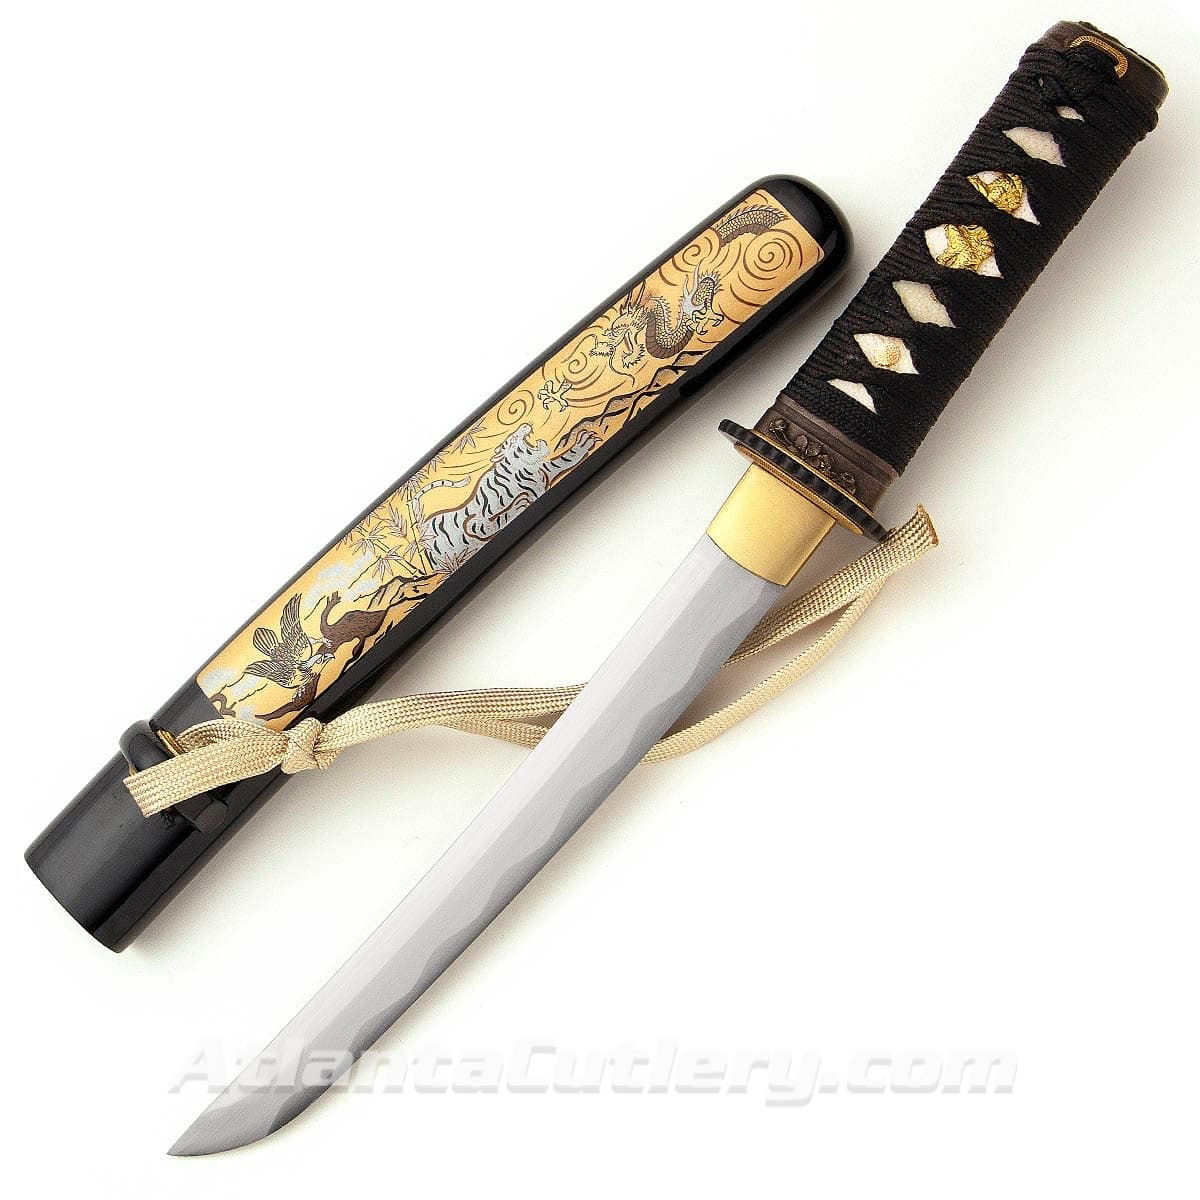 White Tiger Tanto includes black lacquer wood sheath with a painting of a white tiger fighting a dragon